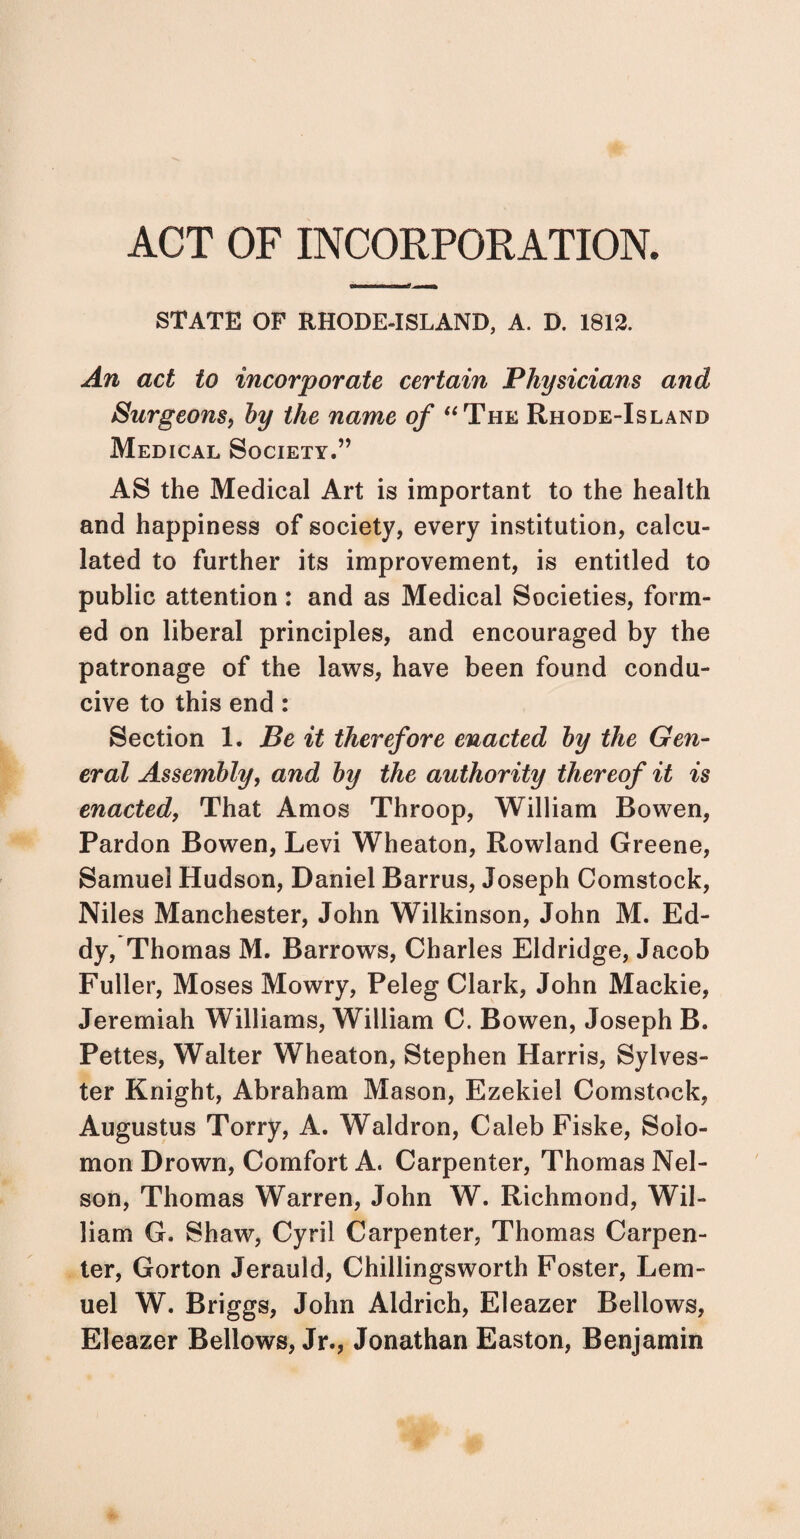 ACT OF INCORPORATION. STATE OF RHODE-ISLAND, A. D. 1812. An act to incorporate certain Physicians and Surgeons, hy the name of “The Rhode-Island Medical Society.” AS the Medical Art is important to the health and happiness of society, every institution, calcu¬ lated to further its improvement, is entitled to public attention: and as Medical Societies, form¬ ed on liberal principles, and encouraged by the patronage of the laws, have been found condu¬ cive to this end : Section 1. Be it therefore enacted by the Gen¬ eral Assembly, and by the authority thereof it is enacted, That Amos Throop, William Bowen, Pardon Bowen, Levi Wheaton, Rowland Greene, Samuel Hudson, Daniel Barrus, Joseph Comstock, Niles Manchester, John Wilkinson, John M. Ed¬ dy, Thomas M. Barrows, Charles Eldridge, Jacob Fuller, Moses Mowry, Peleg Clark, John Mackie, Jeremiah Williams, William C. Bowen, Joseph B. Pettes, Walter Wheaton, Stephen Harris, Sylves¬ ter Knight, Abraham Mason, Ezekiel Comstock, Augustus Torry, A. Waldron, Caleb Fiske, Solo¬ mon Drown, Comfort A. Carpenter, Thomas Nel¬ son, Thomas Warren, John W. Richmond, Wil¬ liam G. Shaw, Cyril Carpenter, Thomas Carpen¬ ter, Gorton Jerauld, Chillingsworth Foster, Lem¬ uel W. Briggs, John Aldrich, Eleazer Bellows, Eleazer Bellows, Jr., Jonathan Easton, Benjamin